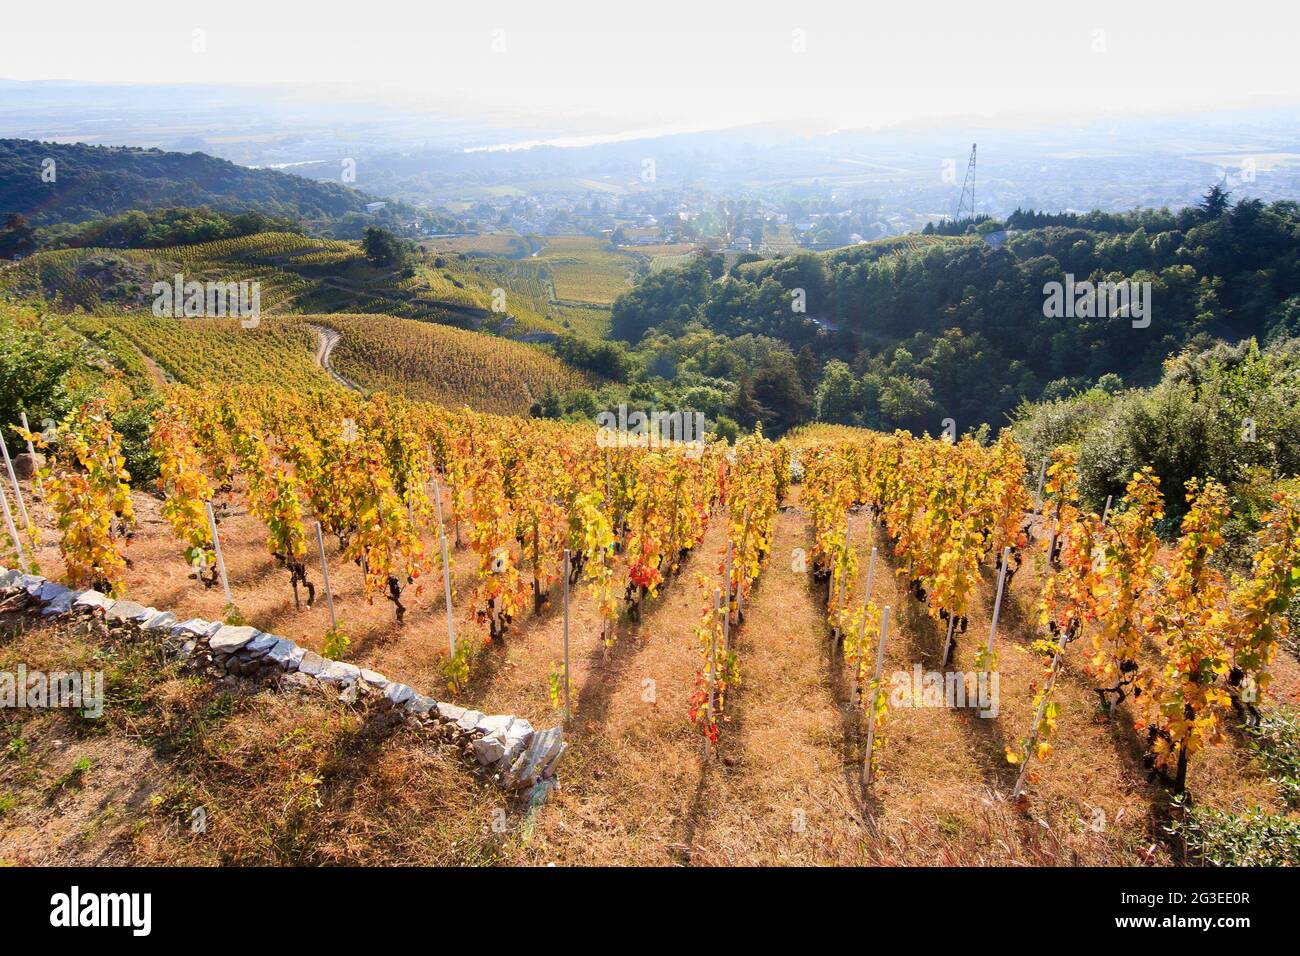 FRANCE. ARDECHE (07) THE VINEYARD WITH THE AUTUMN TYPE OF VINE SYRAH THE VALLEY OF THE RHONE Stock Photo